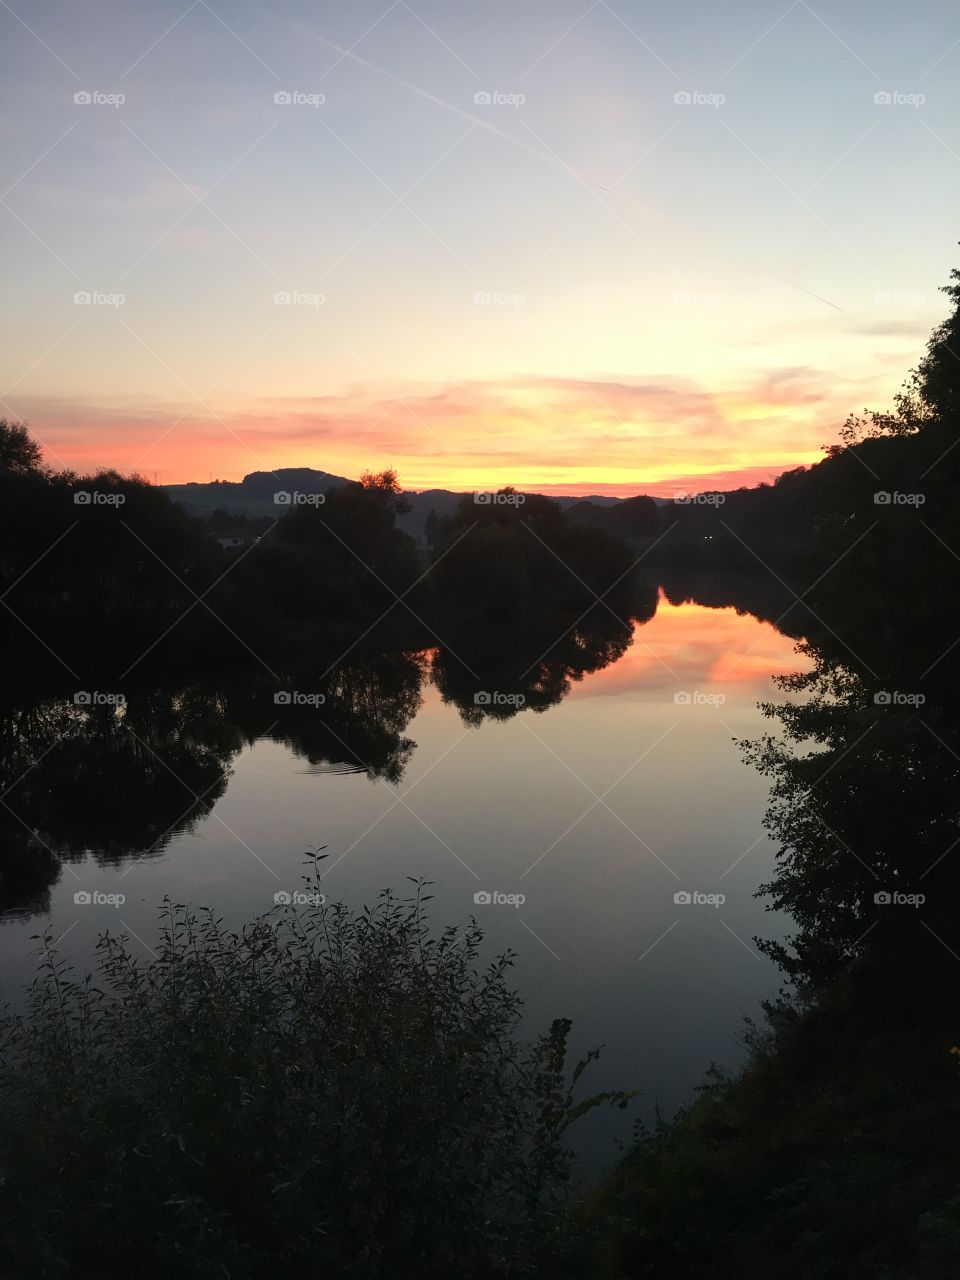 Sunset on the river 